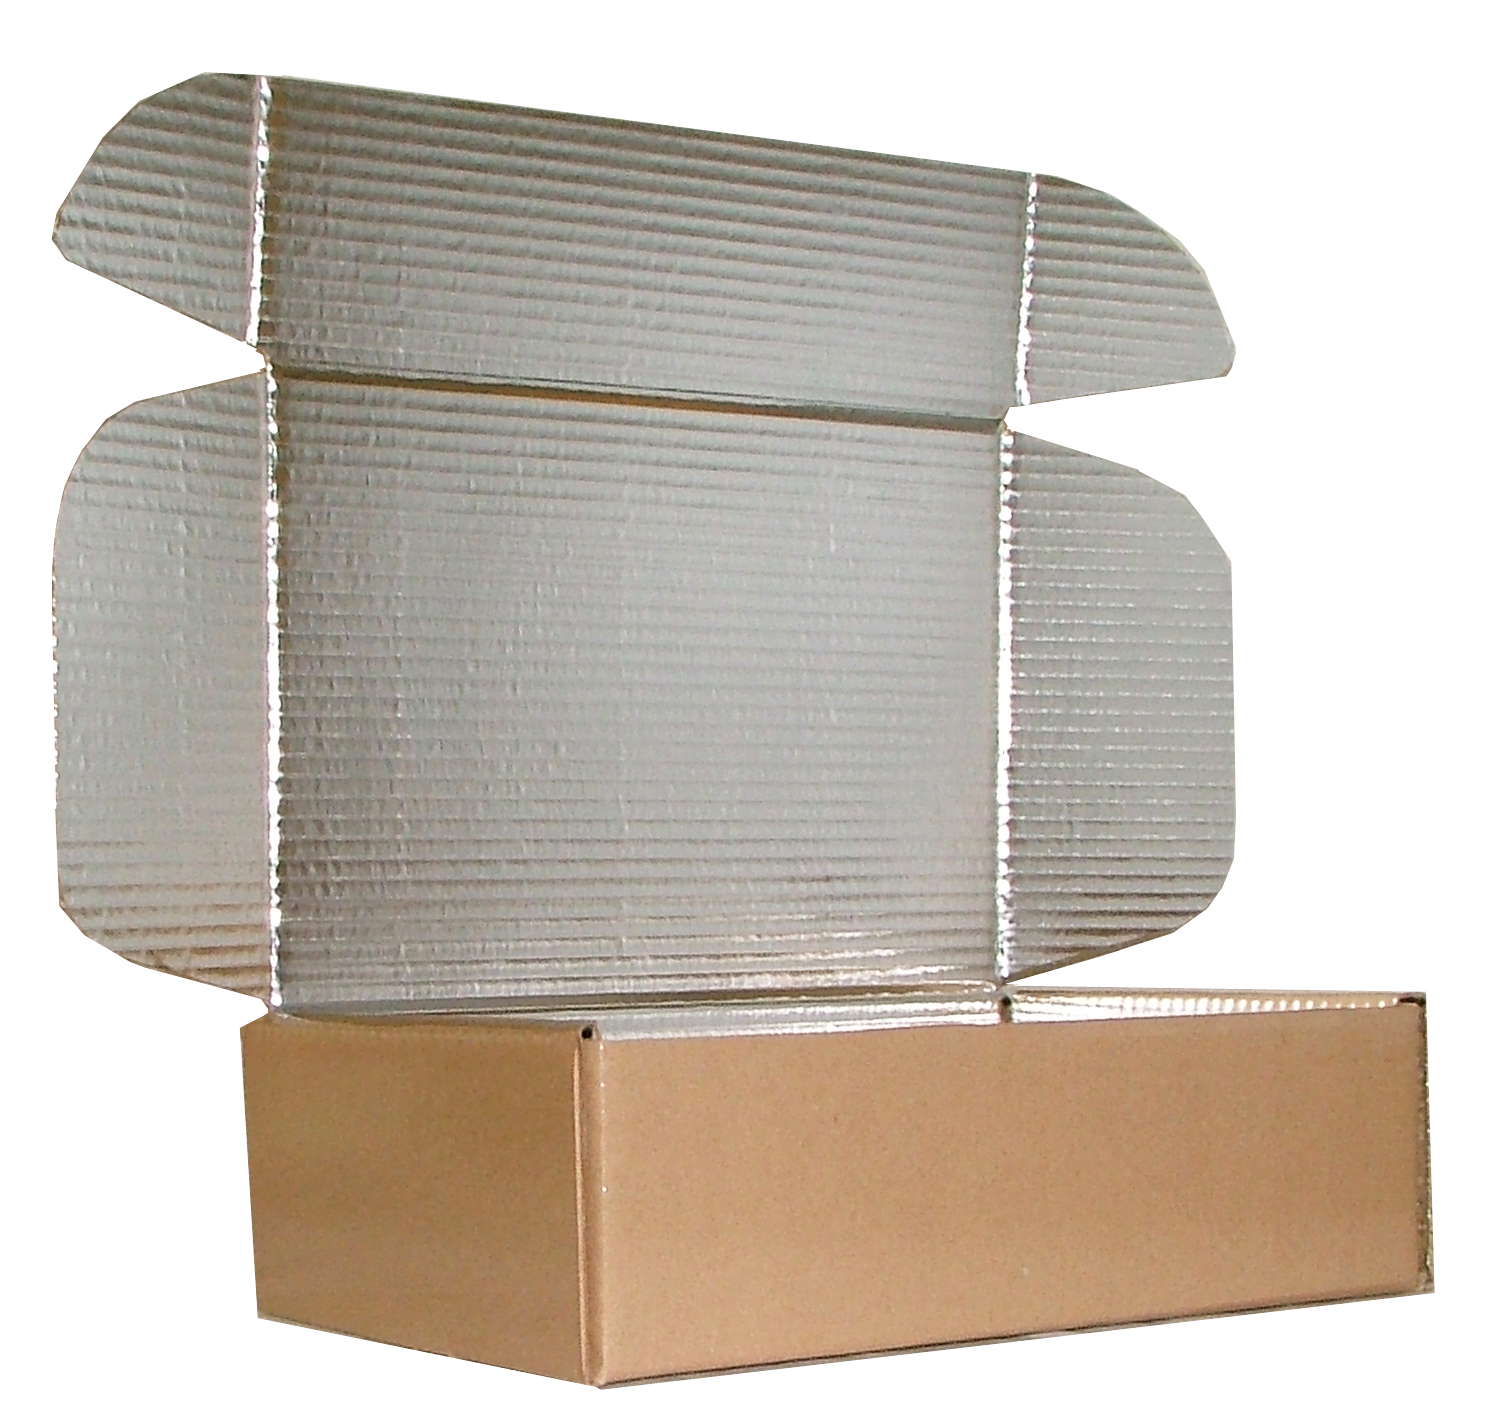 Insulated Box 380mm x 263mm x 153mm